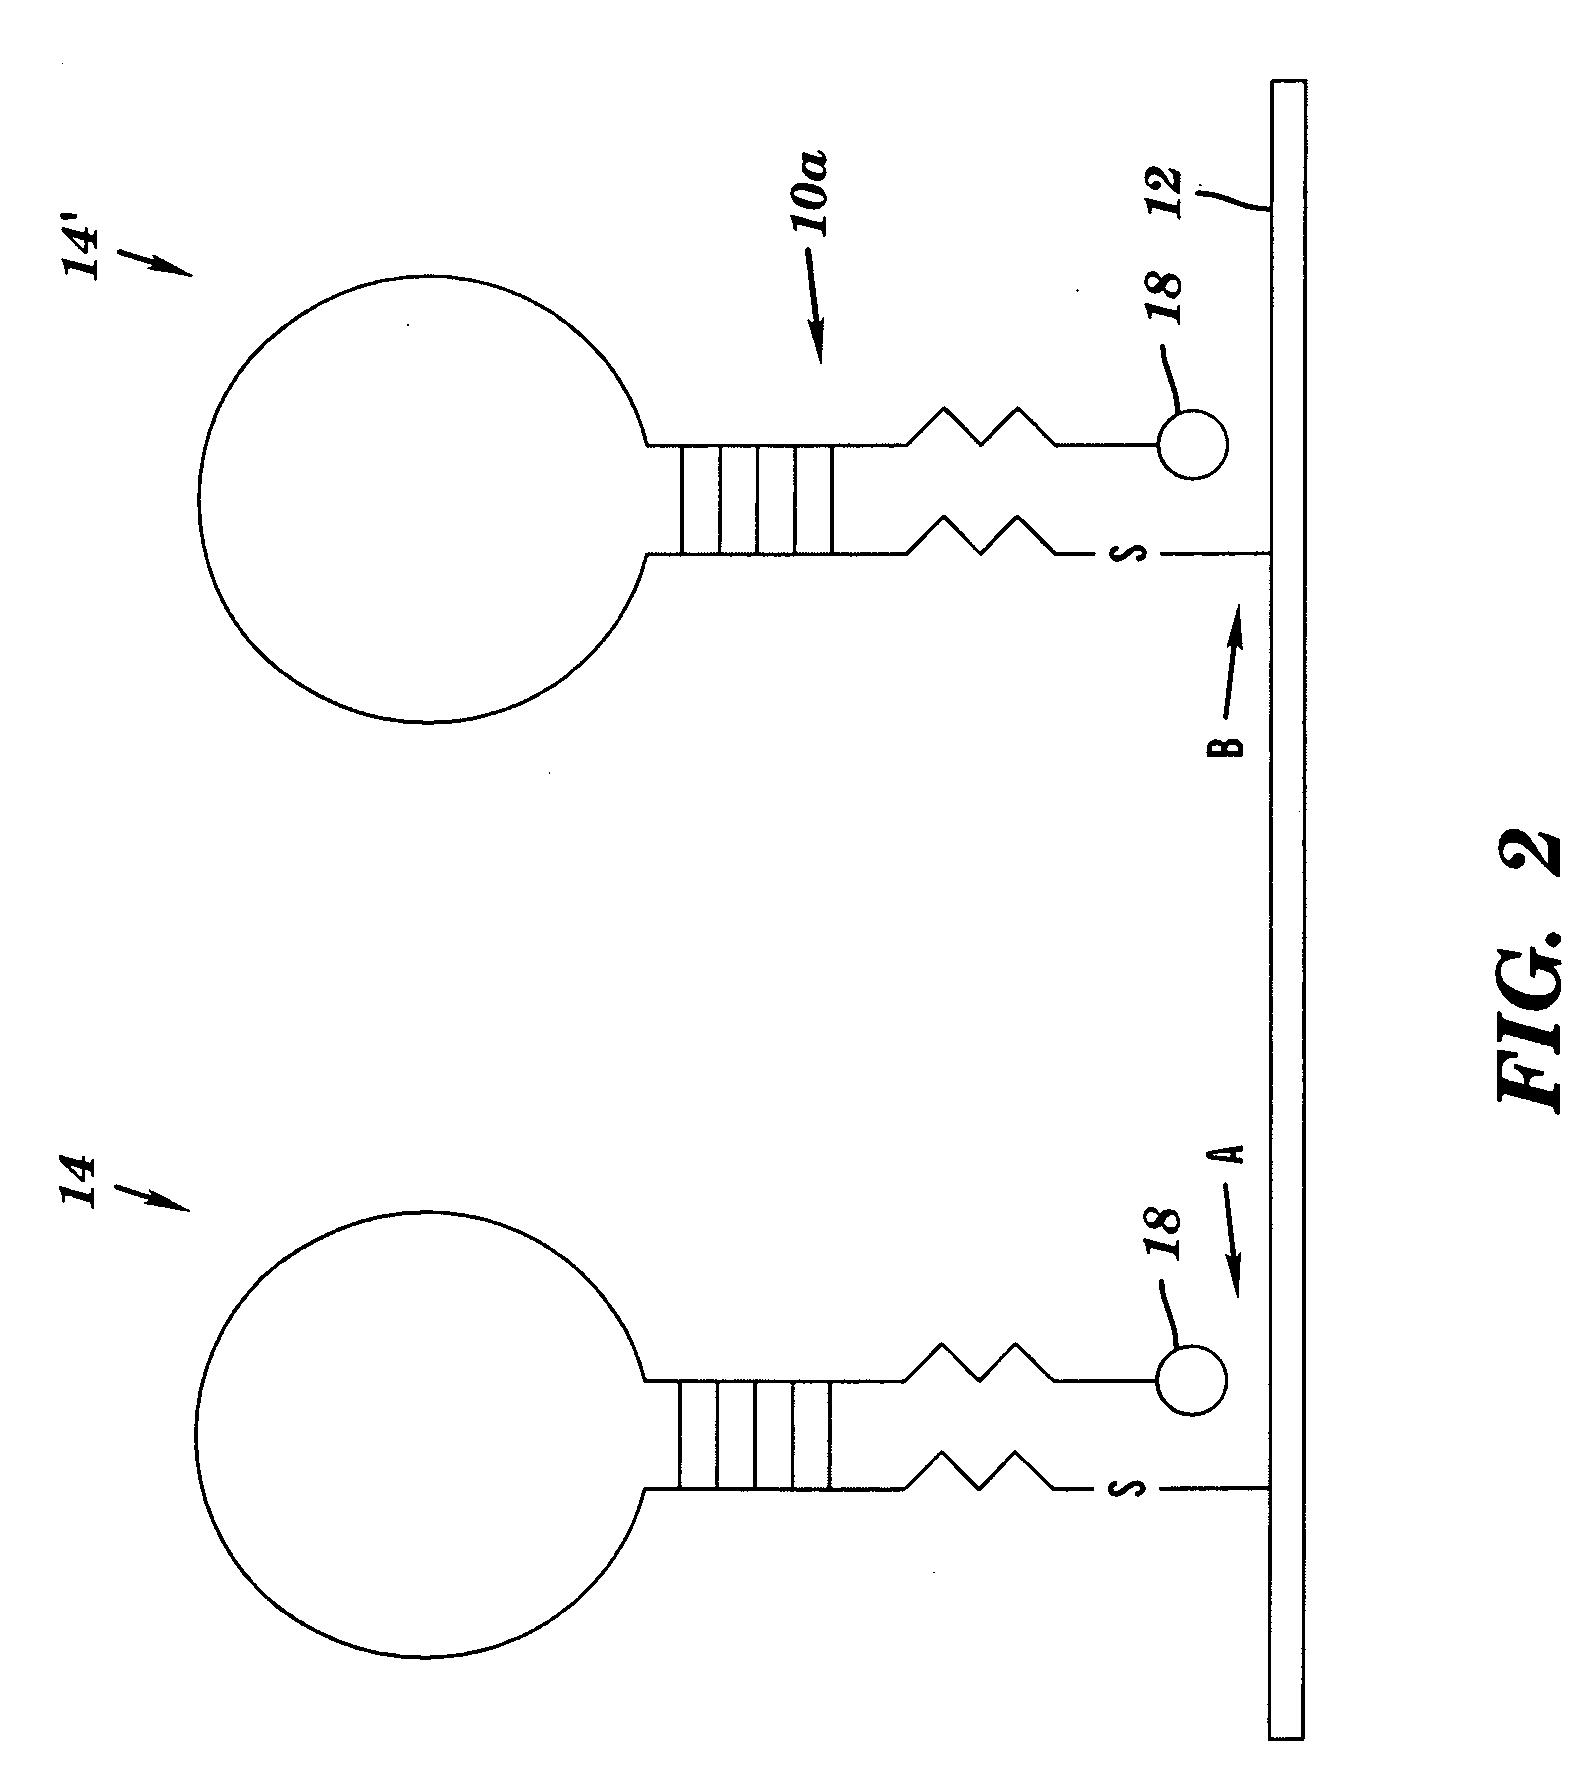 DNA microarray having hairpin probes tethered to nanostructured metal surface